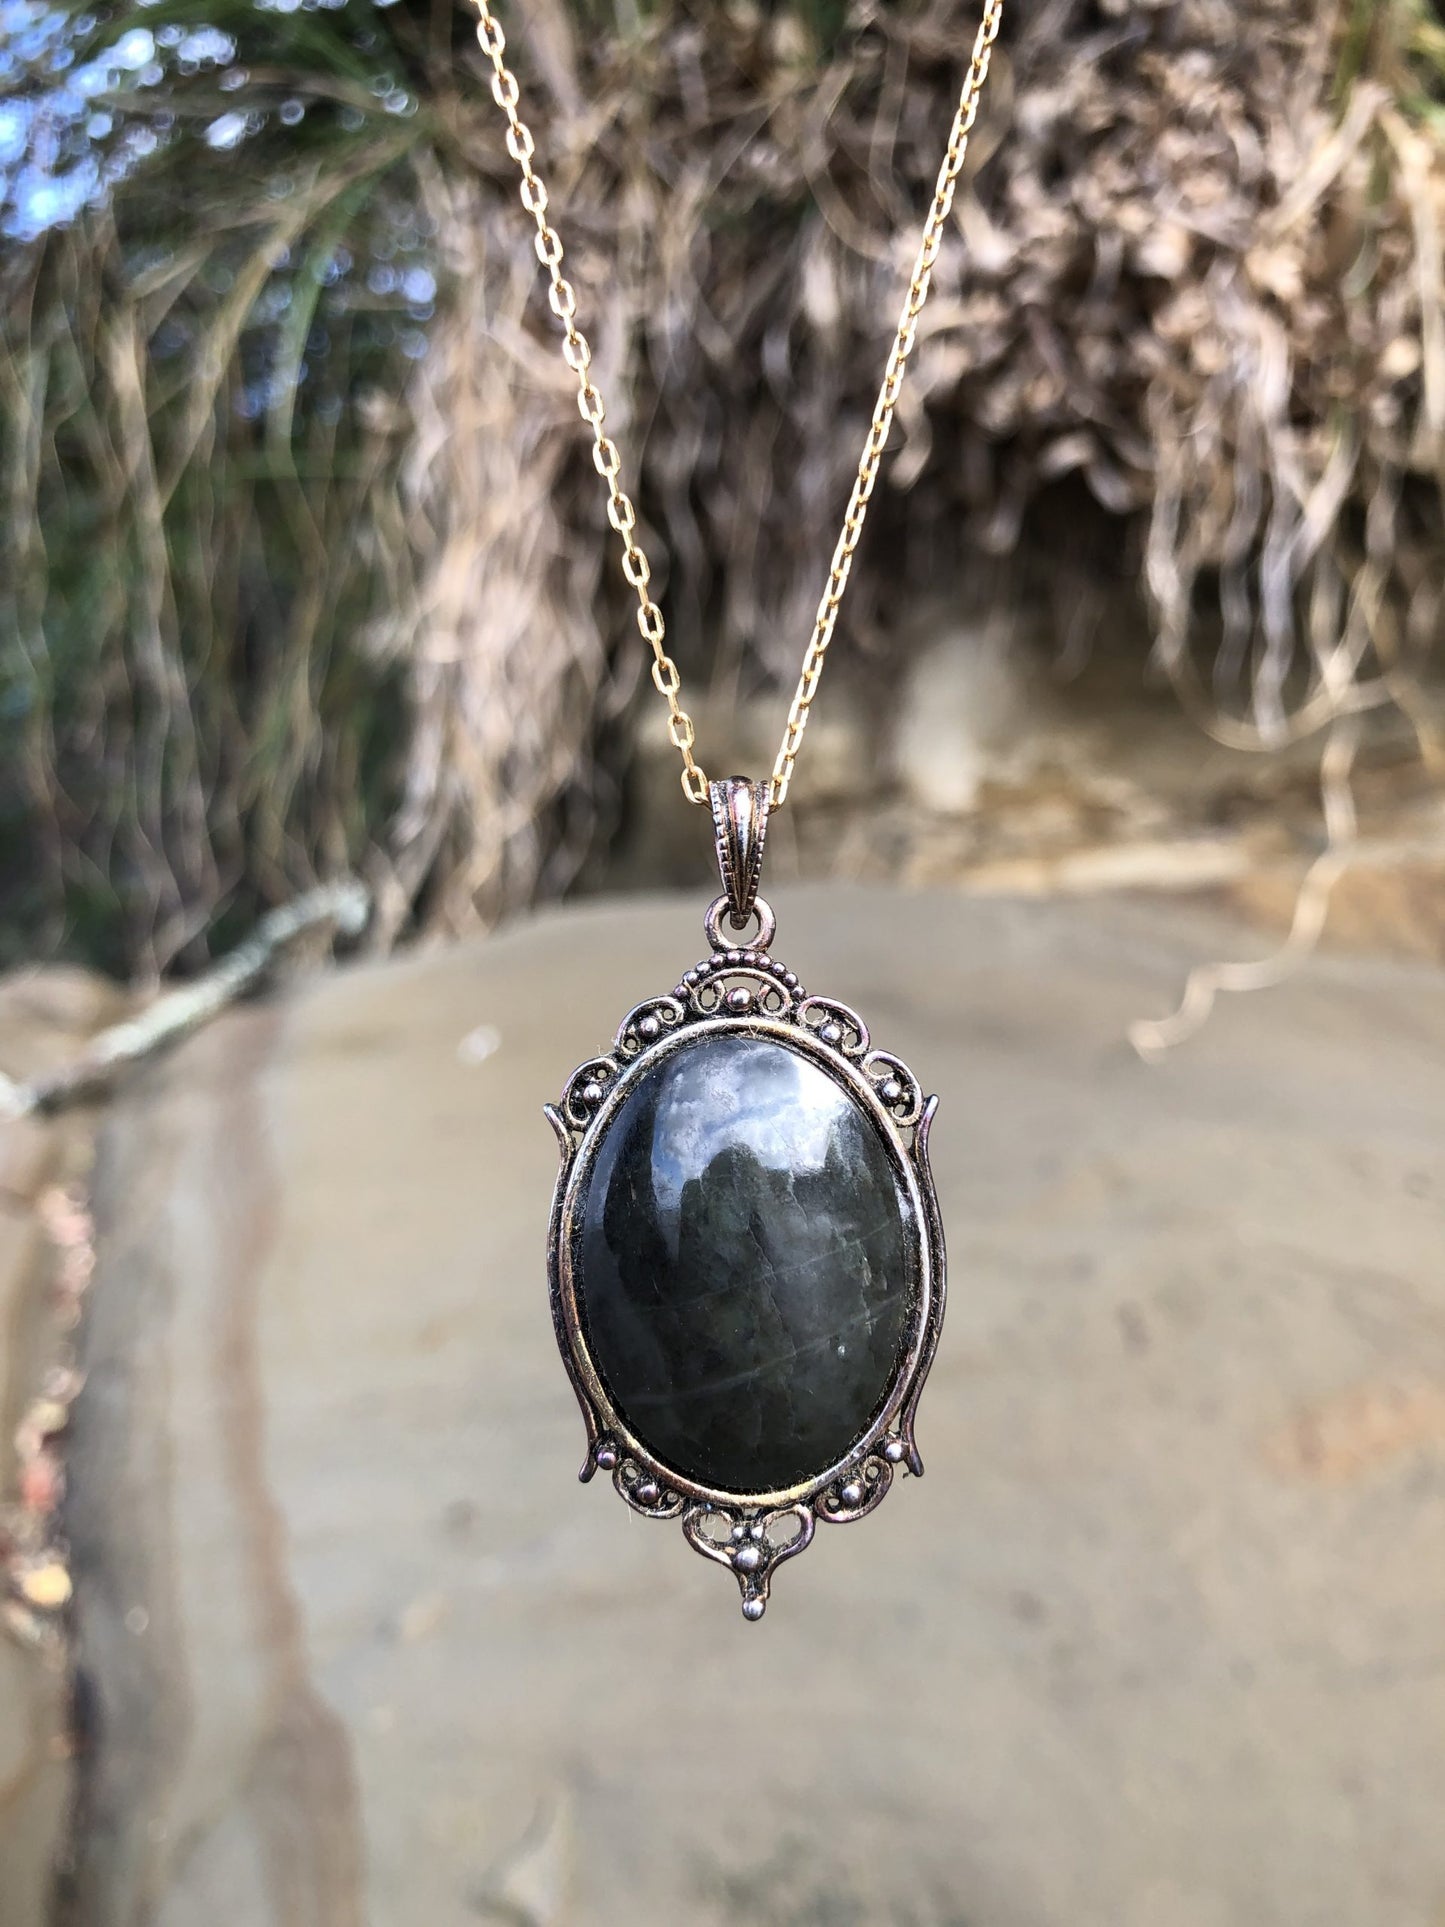 Necklace with rare New Zealand Black Jade (greenstone or Pounamu), hand polished to a 30x22mm cabochon and set in a copper tone setting with 19 inch chain.